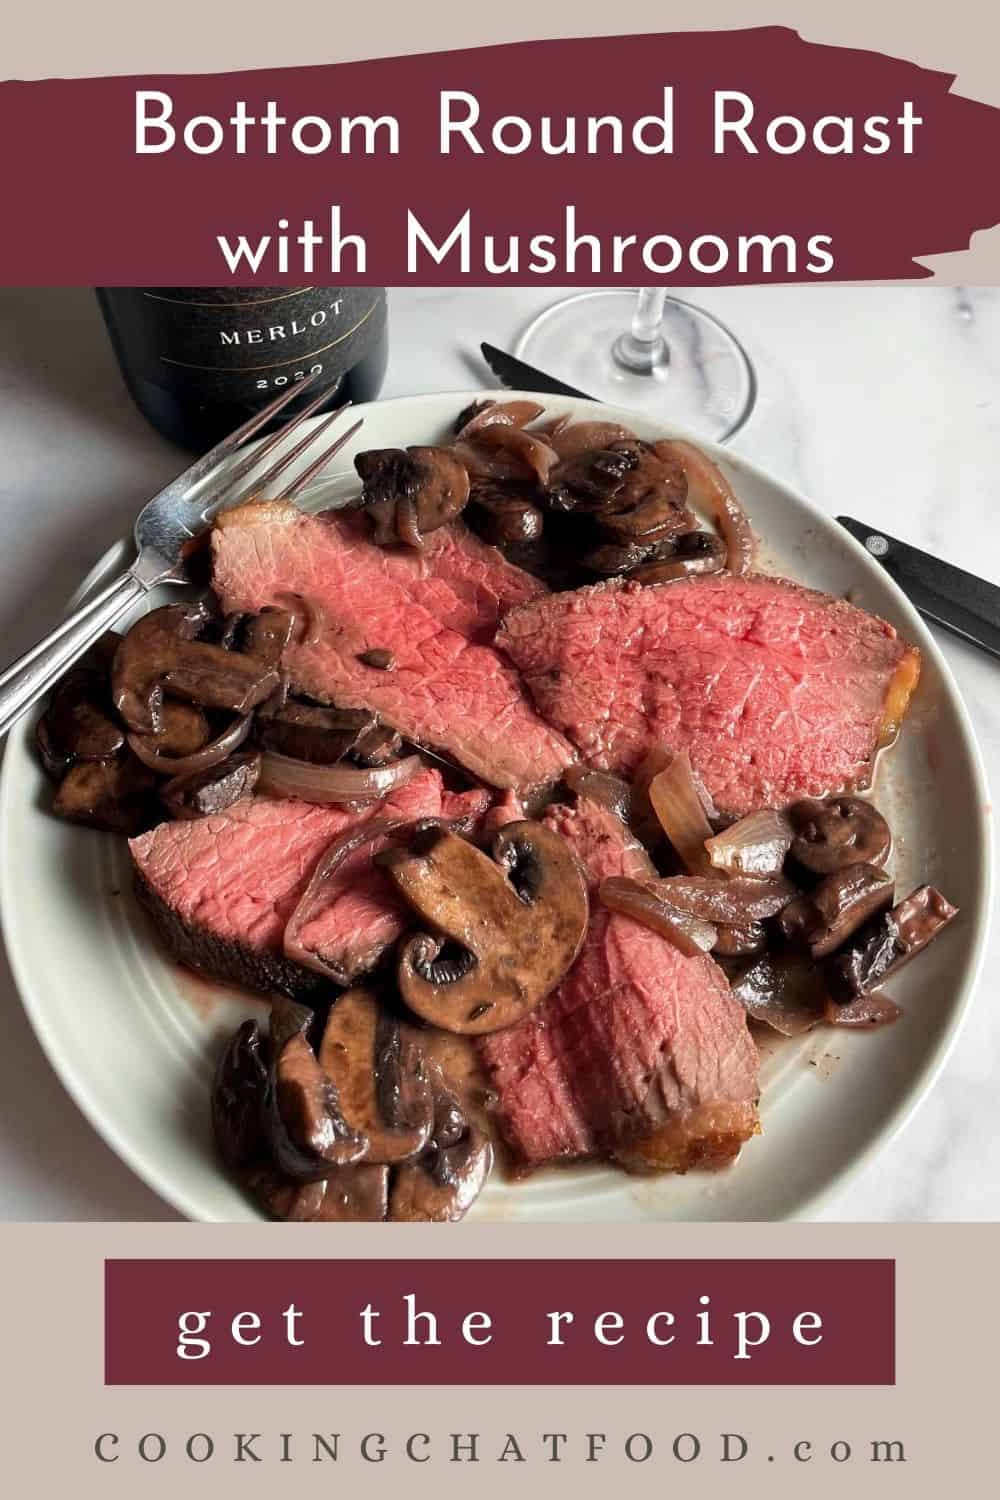 a pinterest image of the bottom round roast beef with mushrooms, and text that gives the recipe name.